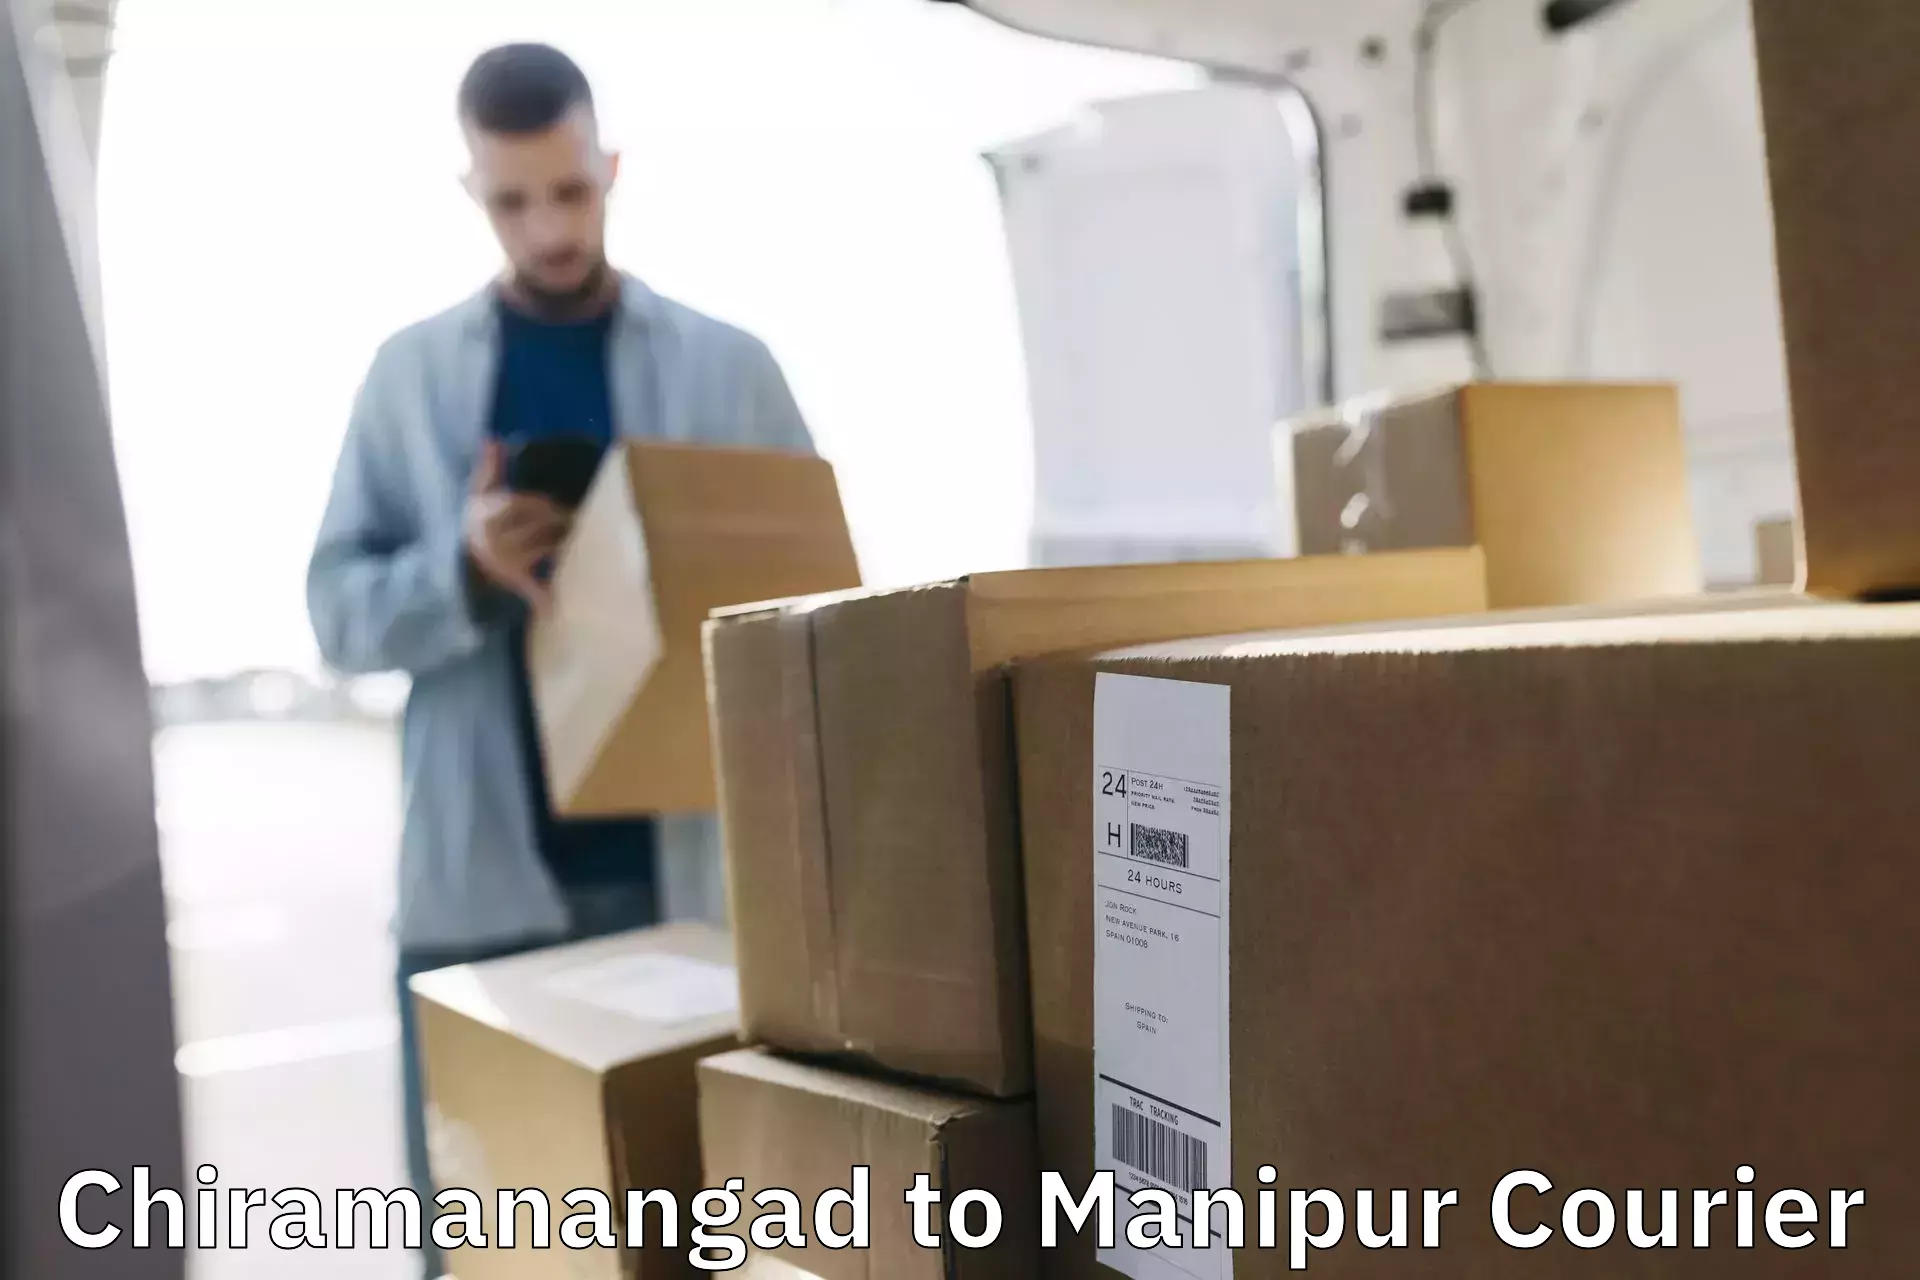 Quality courier partnerships Chiramanangad to Imphal